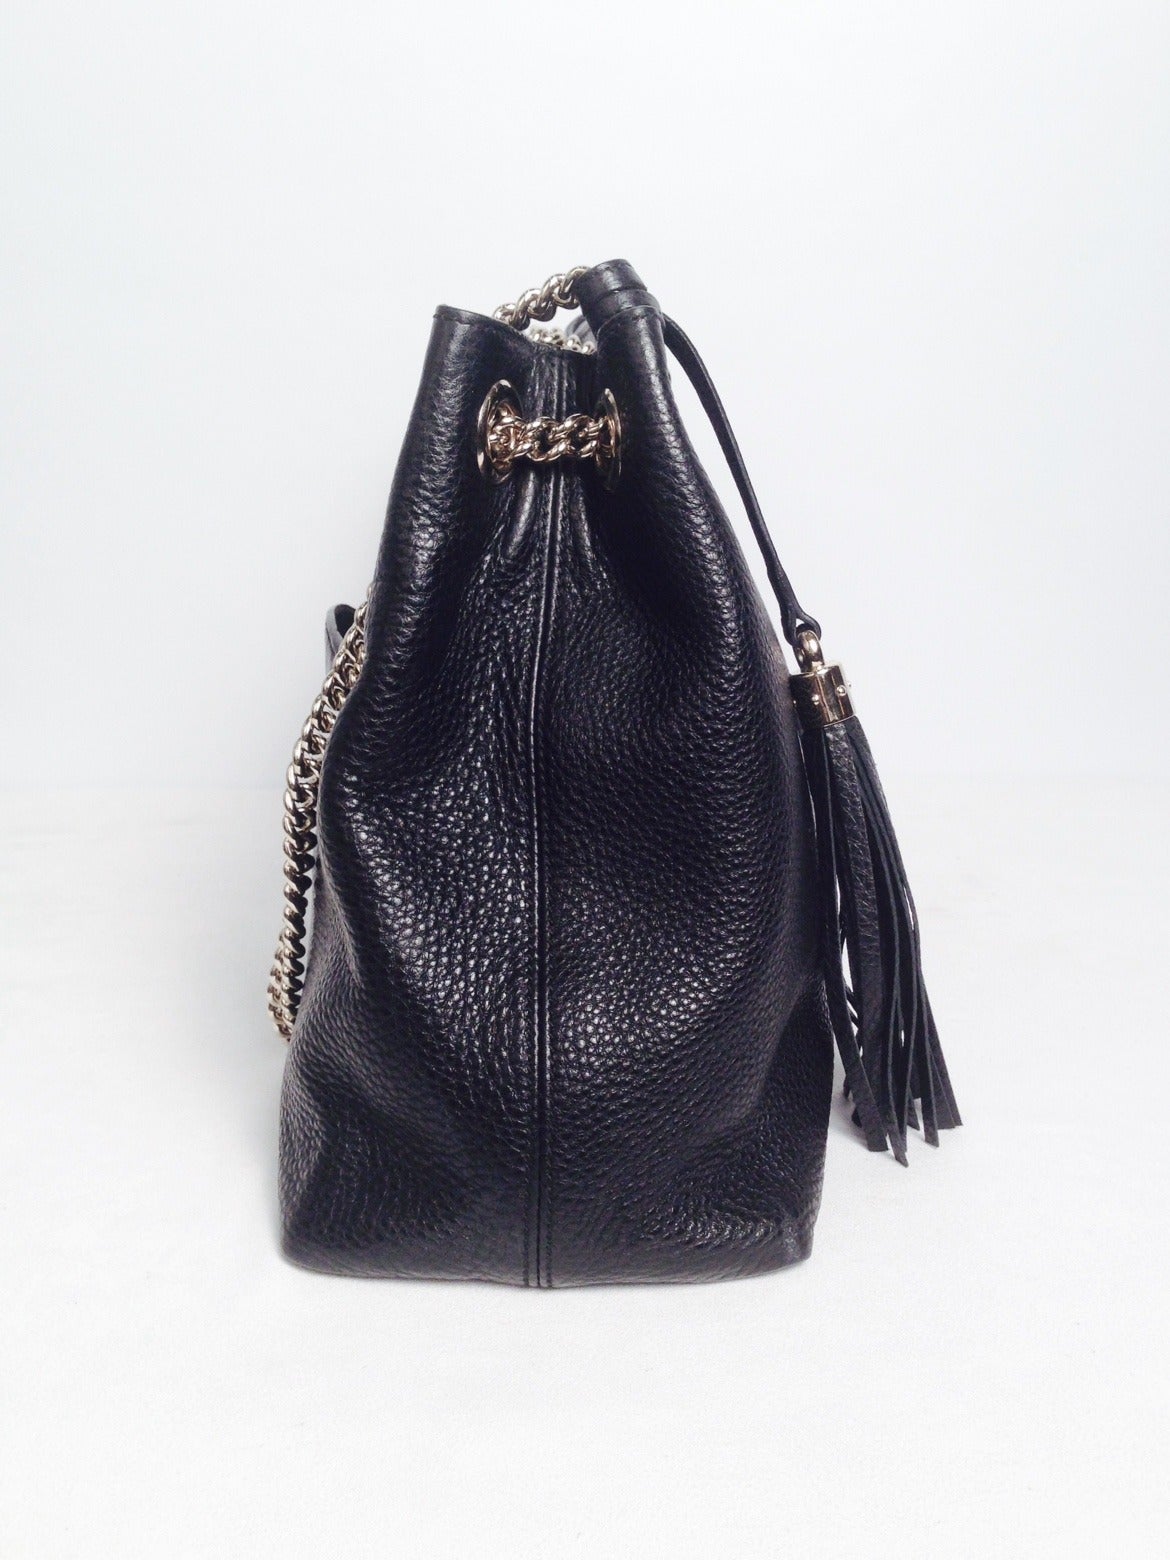 Gucci Medium Leather Soho Chain Tote In Excellent Condition For Sale In Palm Beach, FL